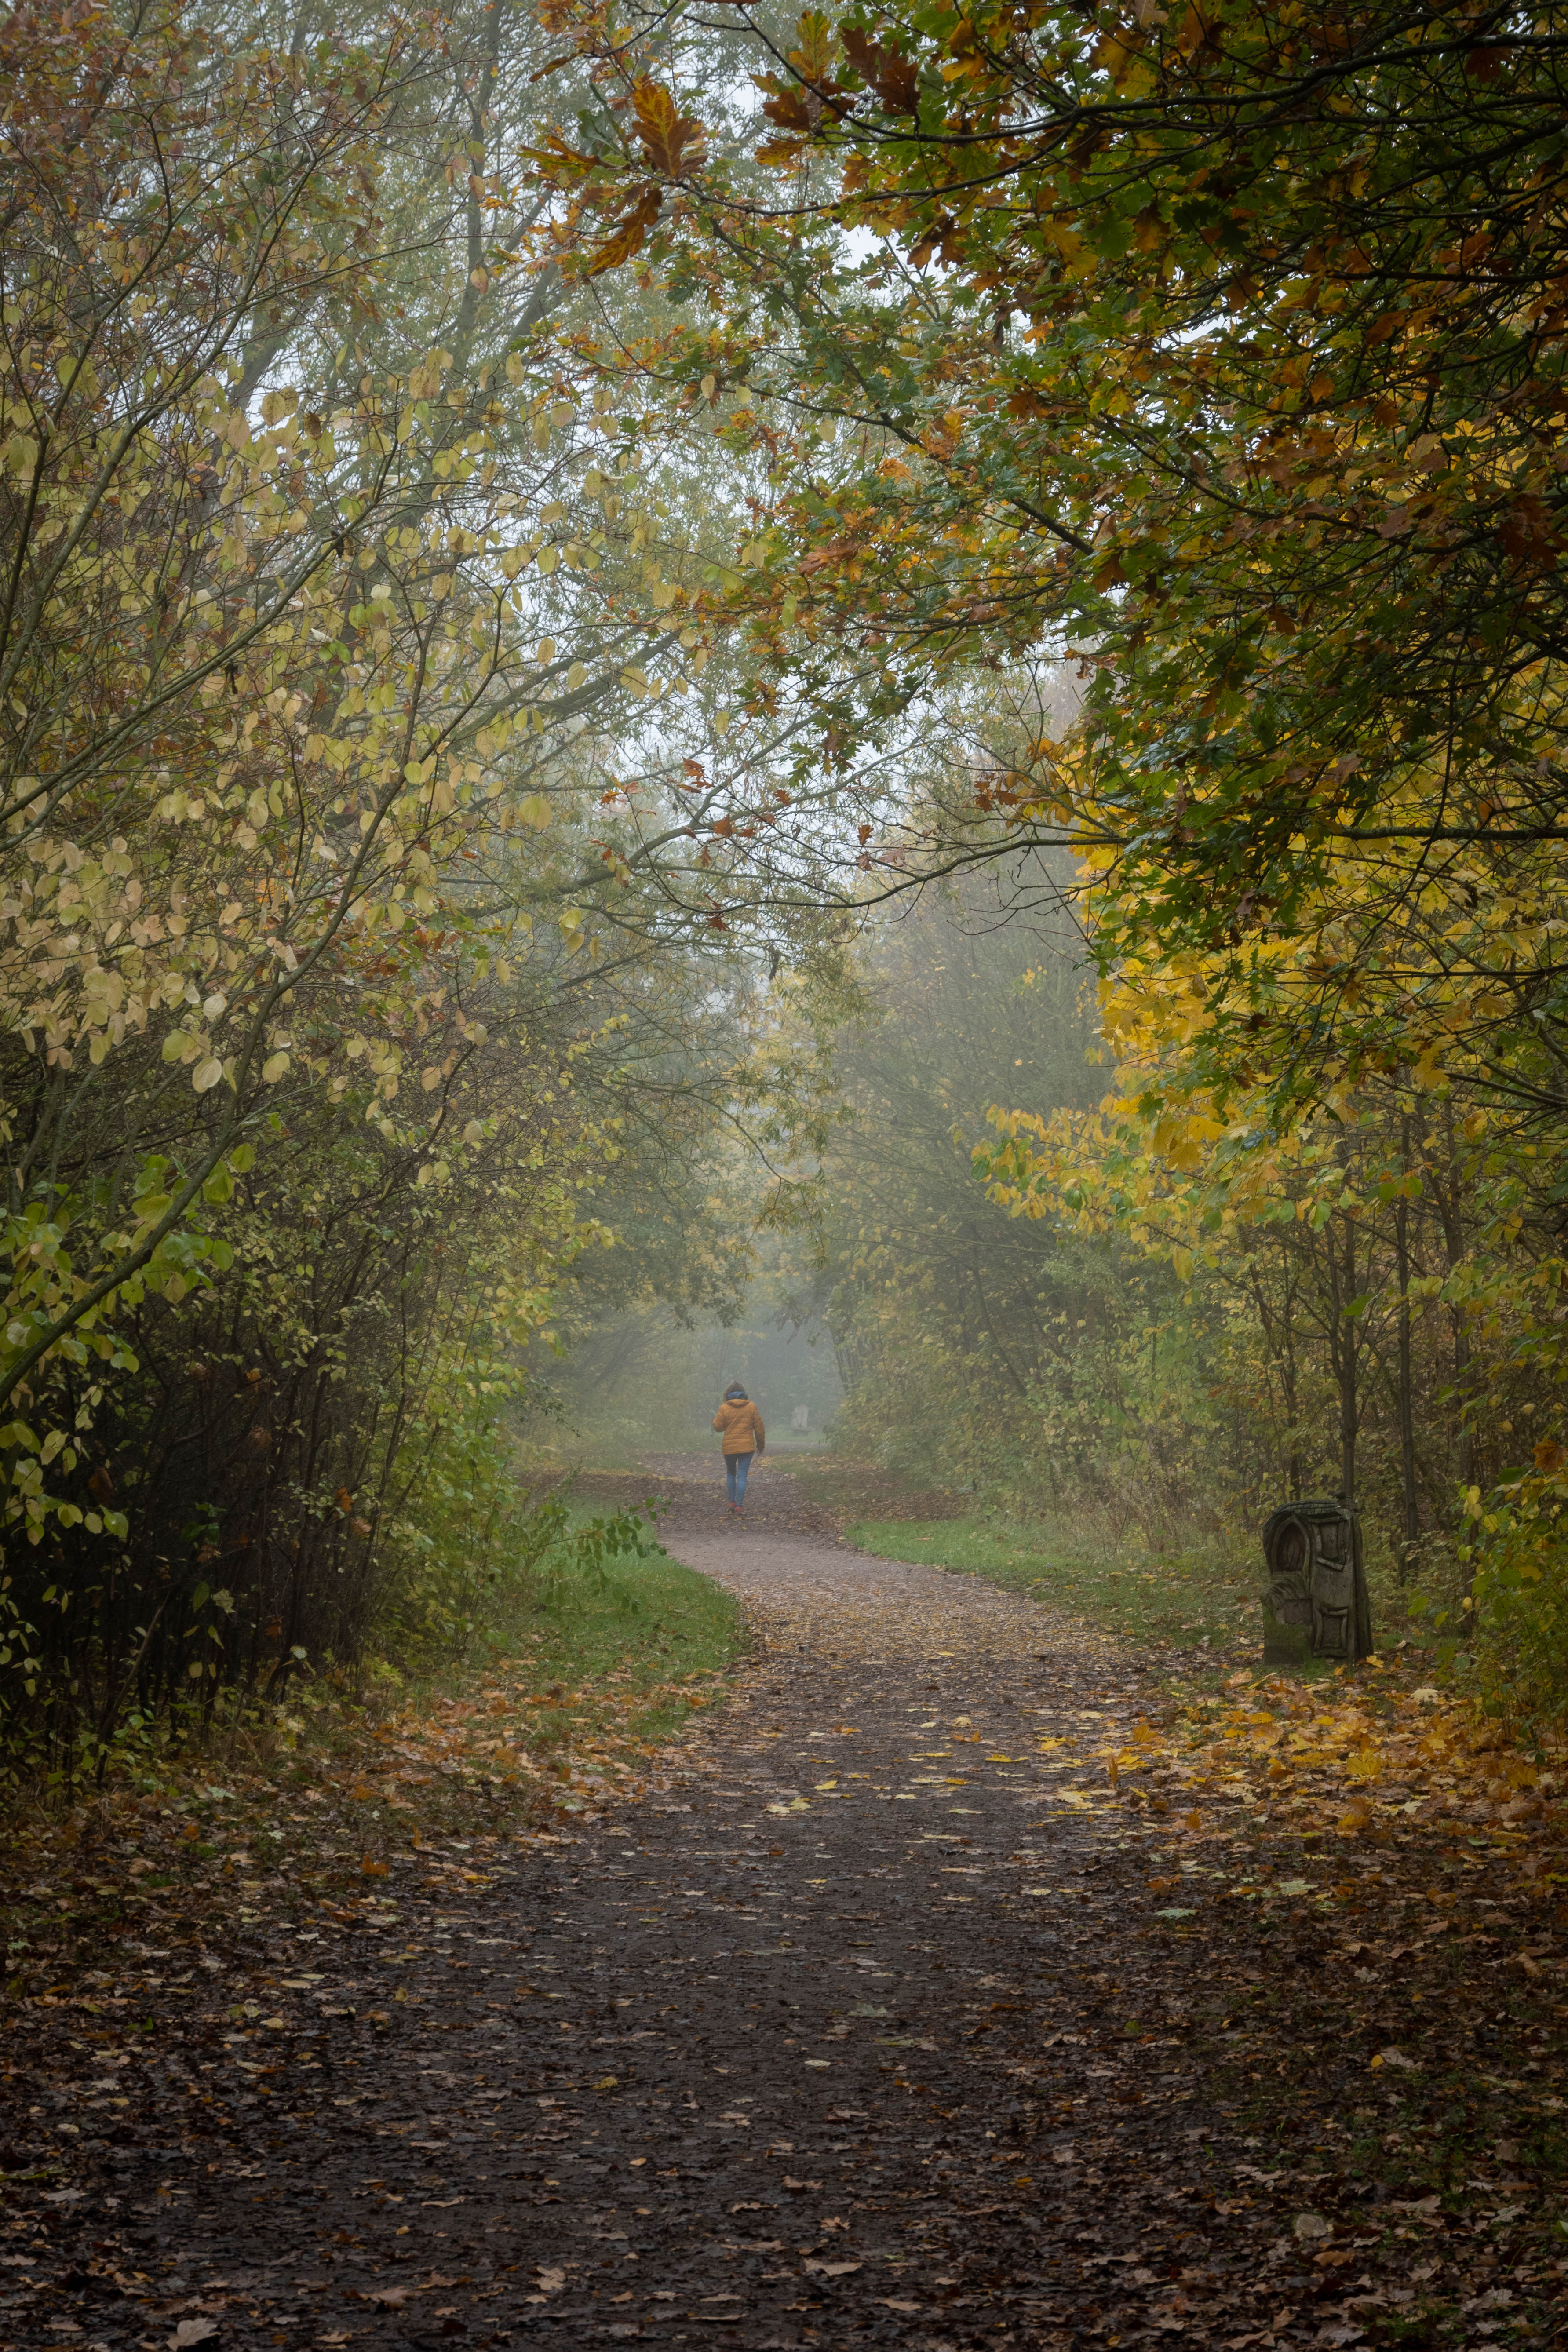 A portrait ratio image of a misty woodland path. The trees on either side of the dirt path have pale yellow and darker green leaves. At certain points along the path the yellow of the leaves is brighter and yellow leaves pool on the ground. This gives the impression of pools of light. In the distance a lone walker in a darker yellow jacket walks. The foreground is in shadow and in the left hand side of the path is a small carved wooden bench. The sky glimpsed between bare branches is white with mist.